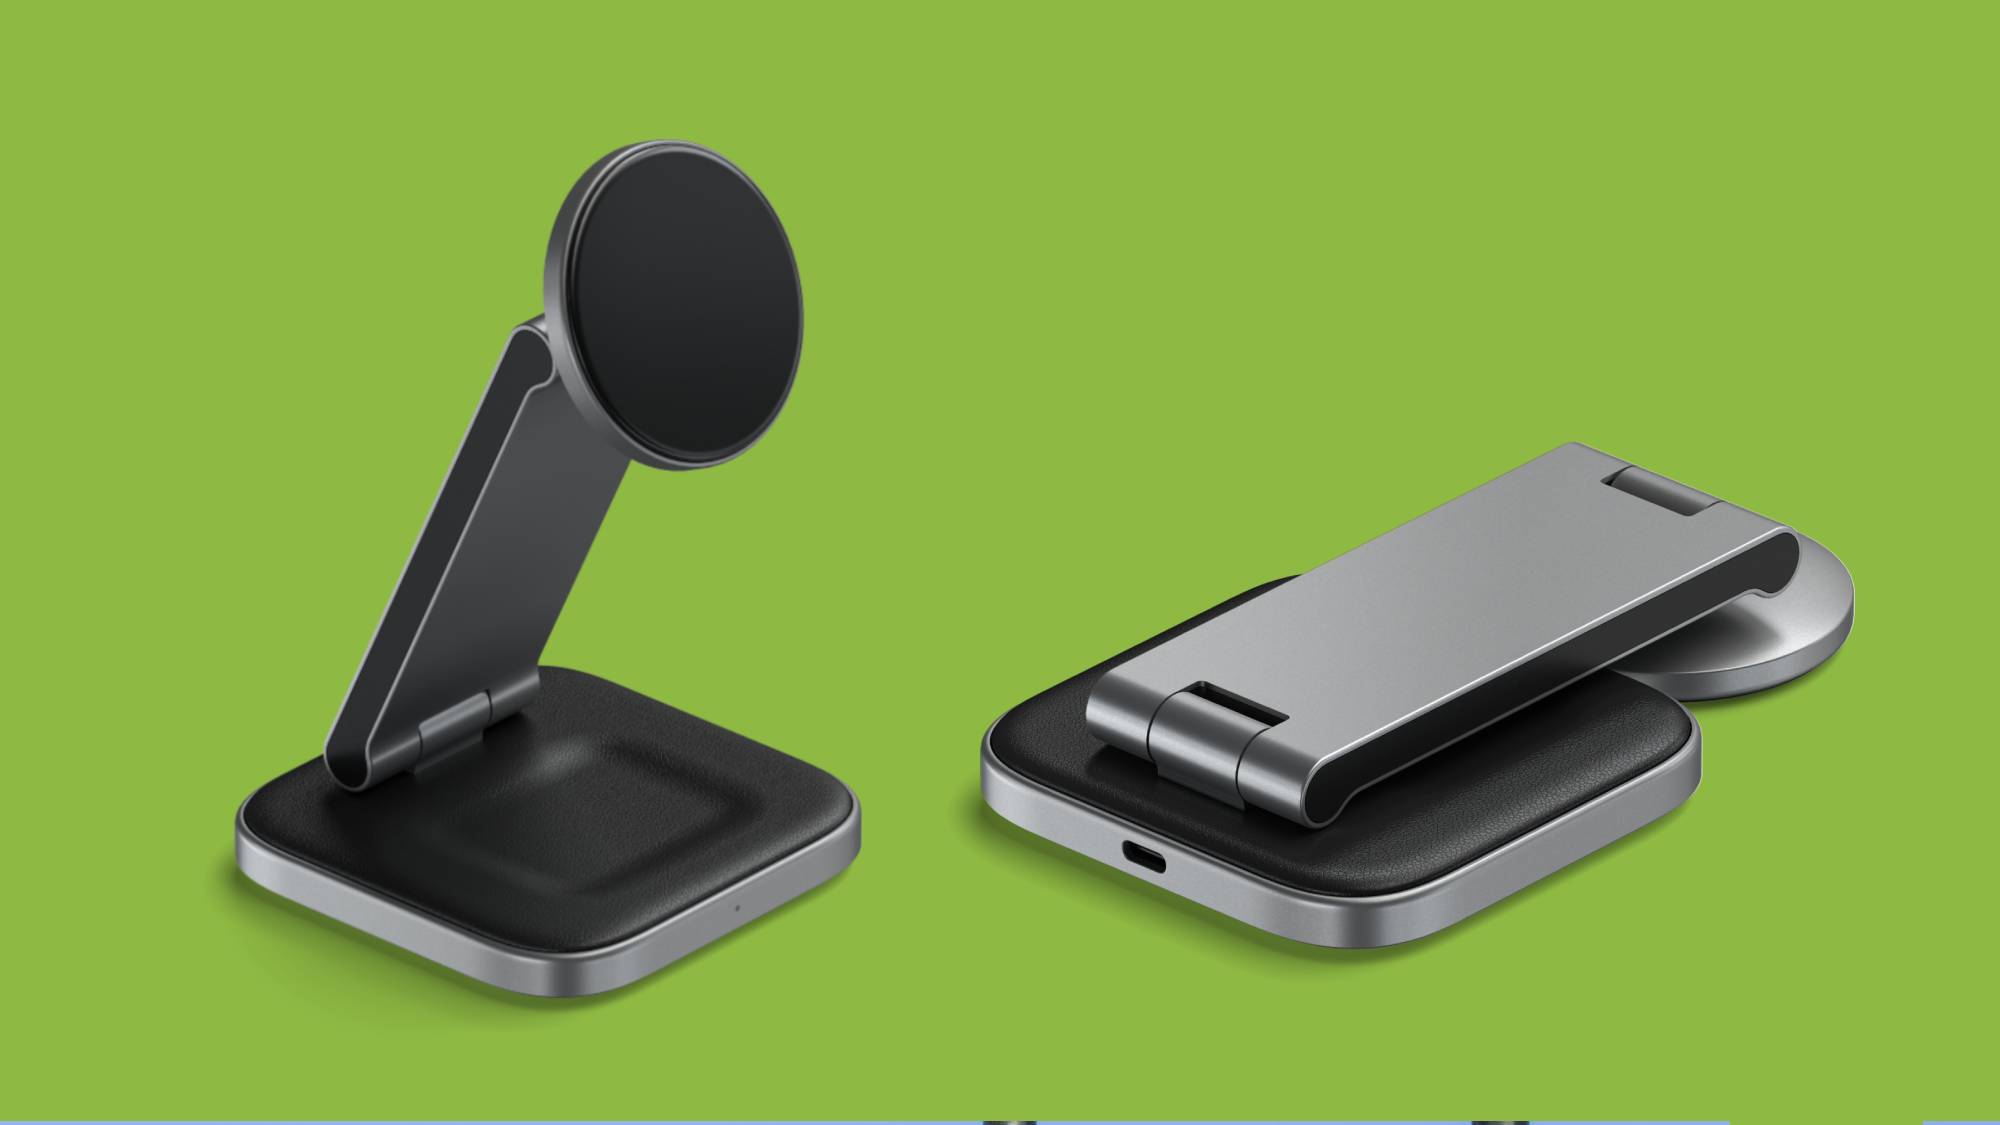 Satechi 2-in-1 wireless charging stand